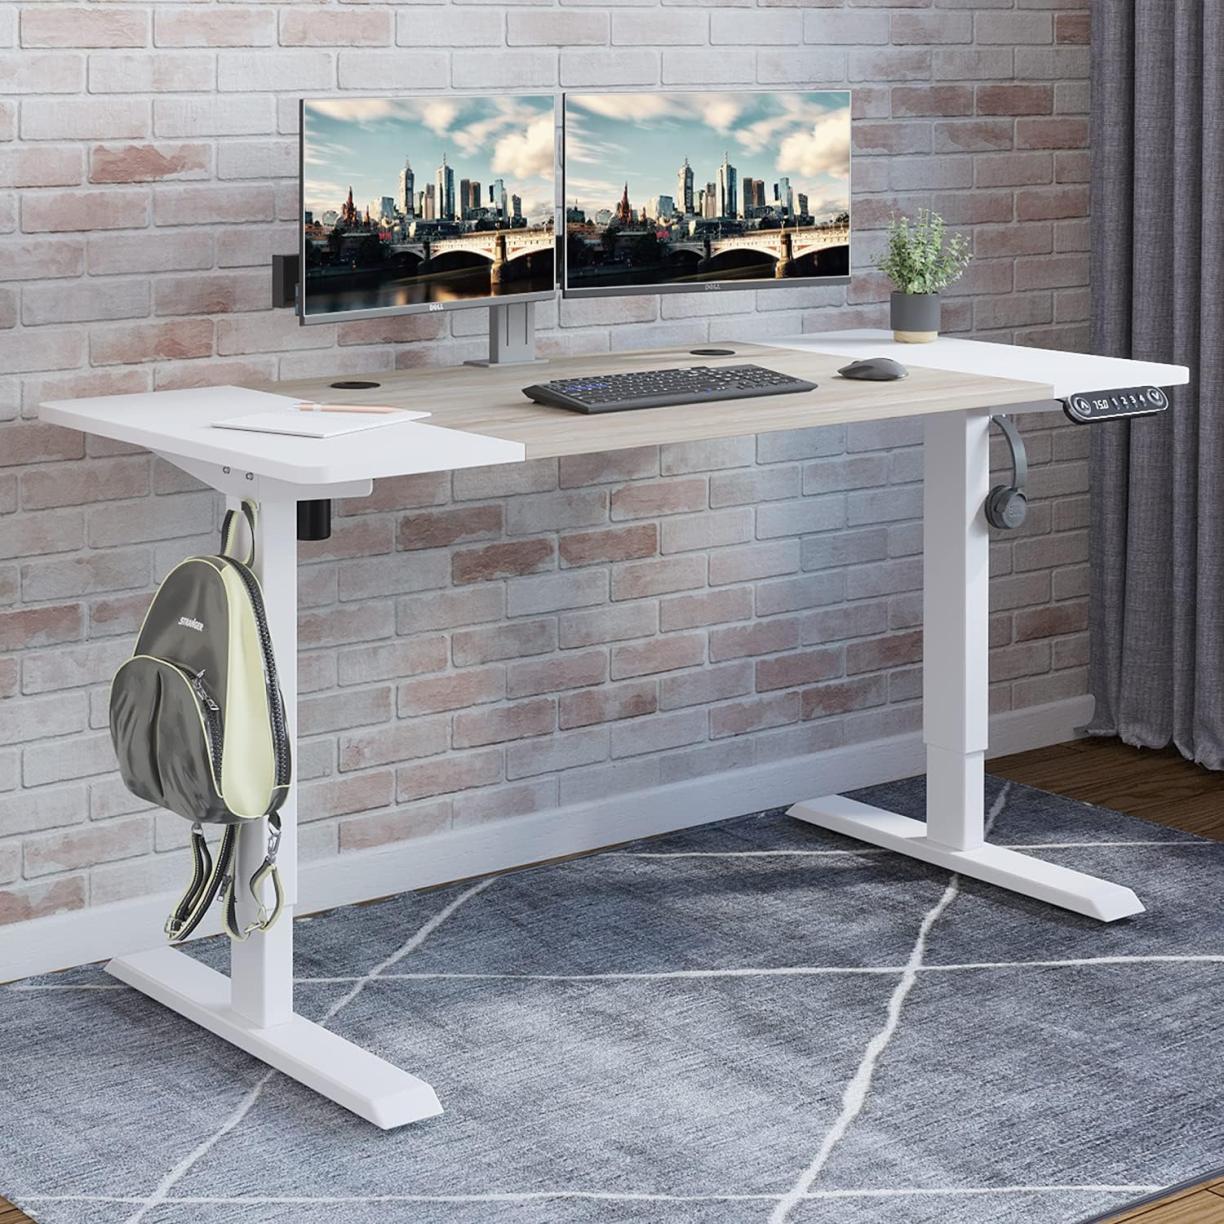 How Do Electric Height Adjustable Desks Work, and What Are Their Benefits?